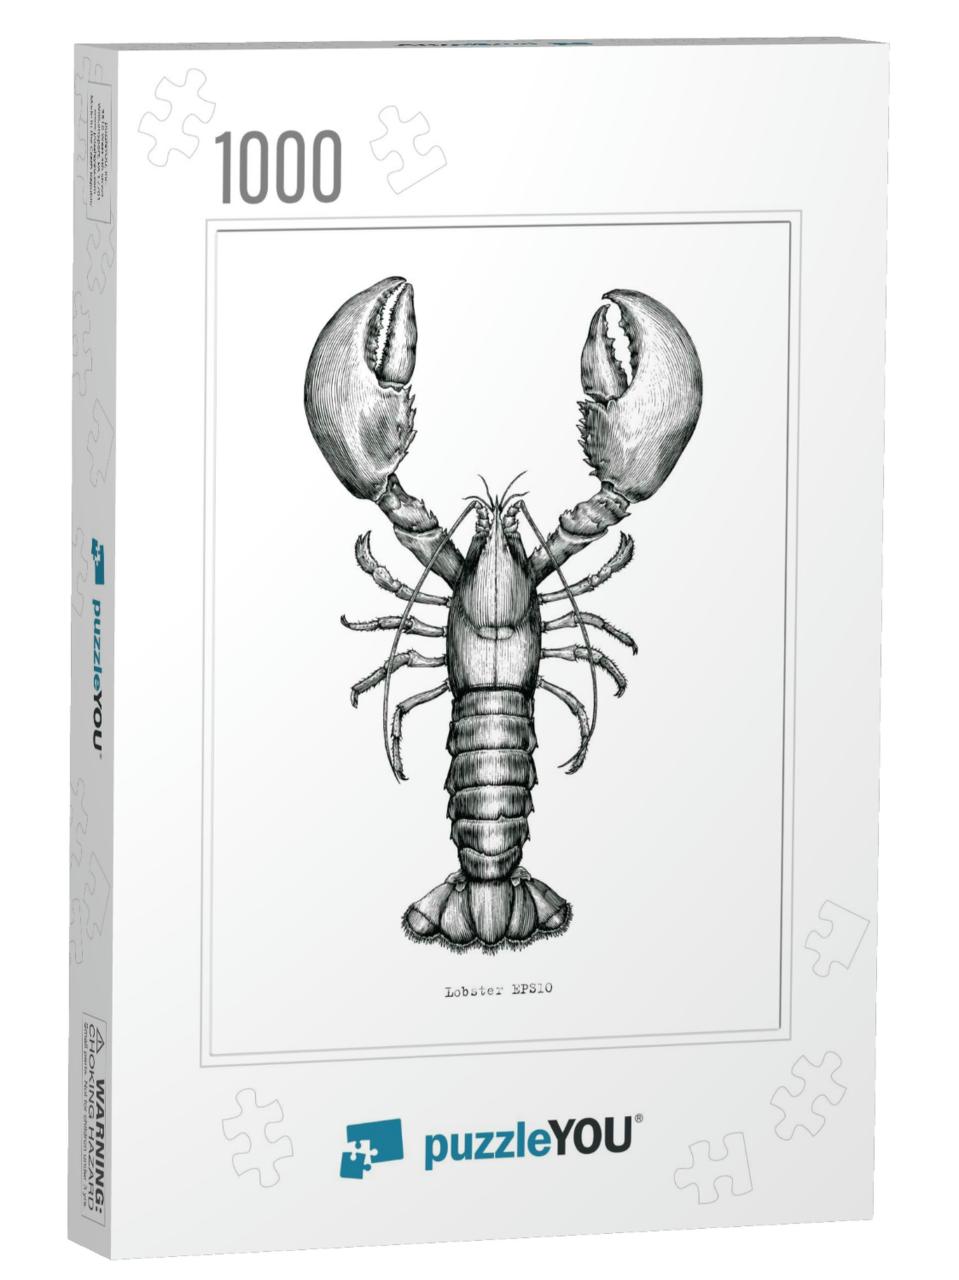 Lobster Hand Drawing Vintage Engraving Illustration... Jigsaw Puzzle with 1000 pieces